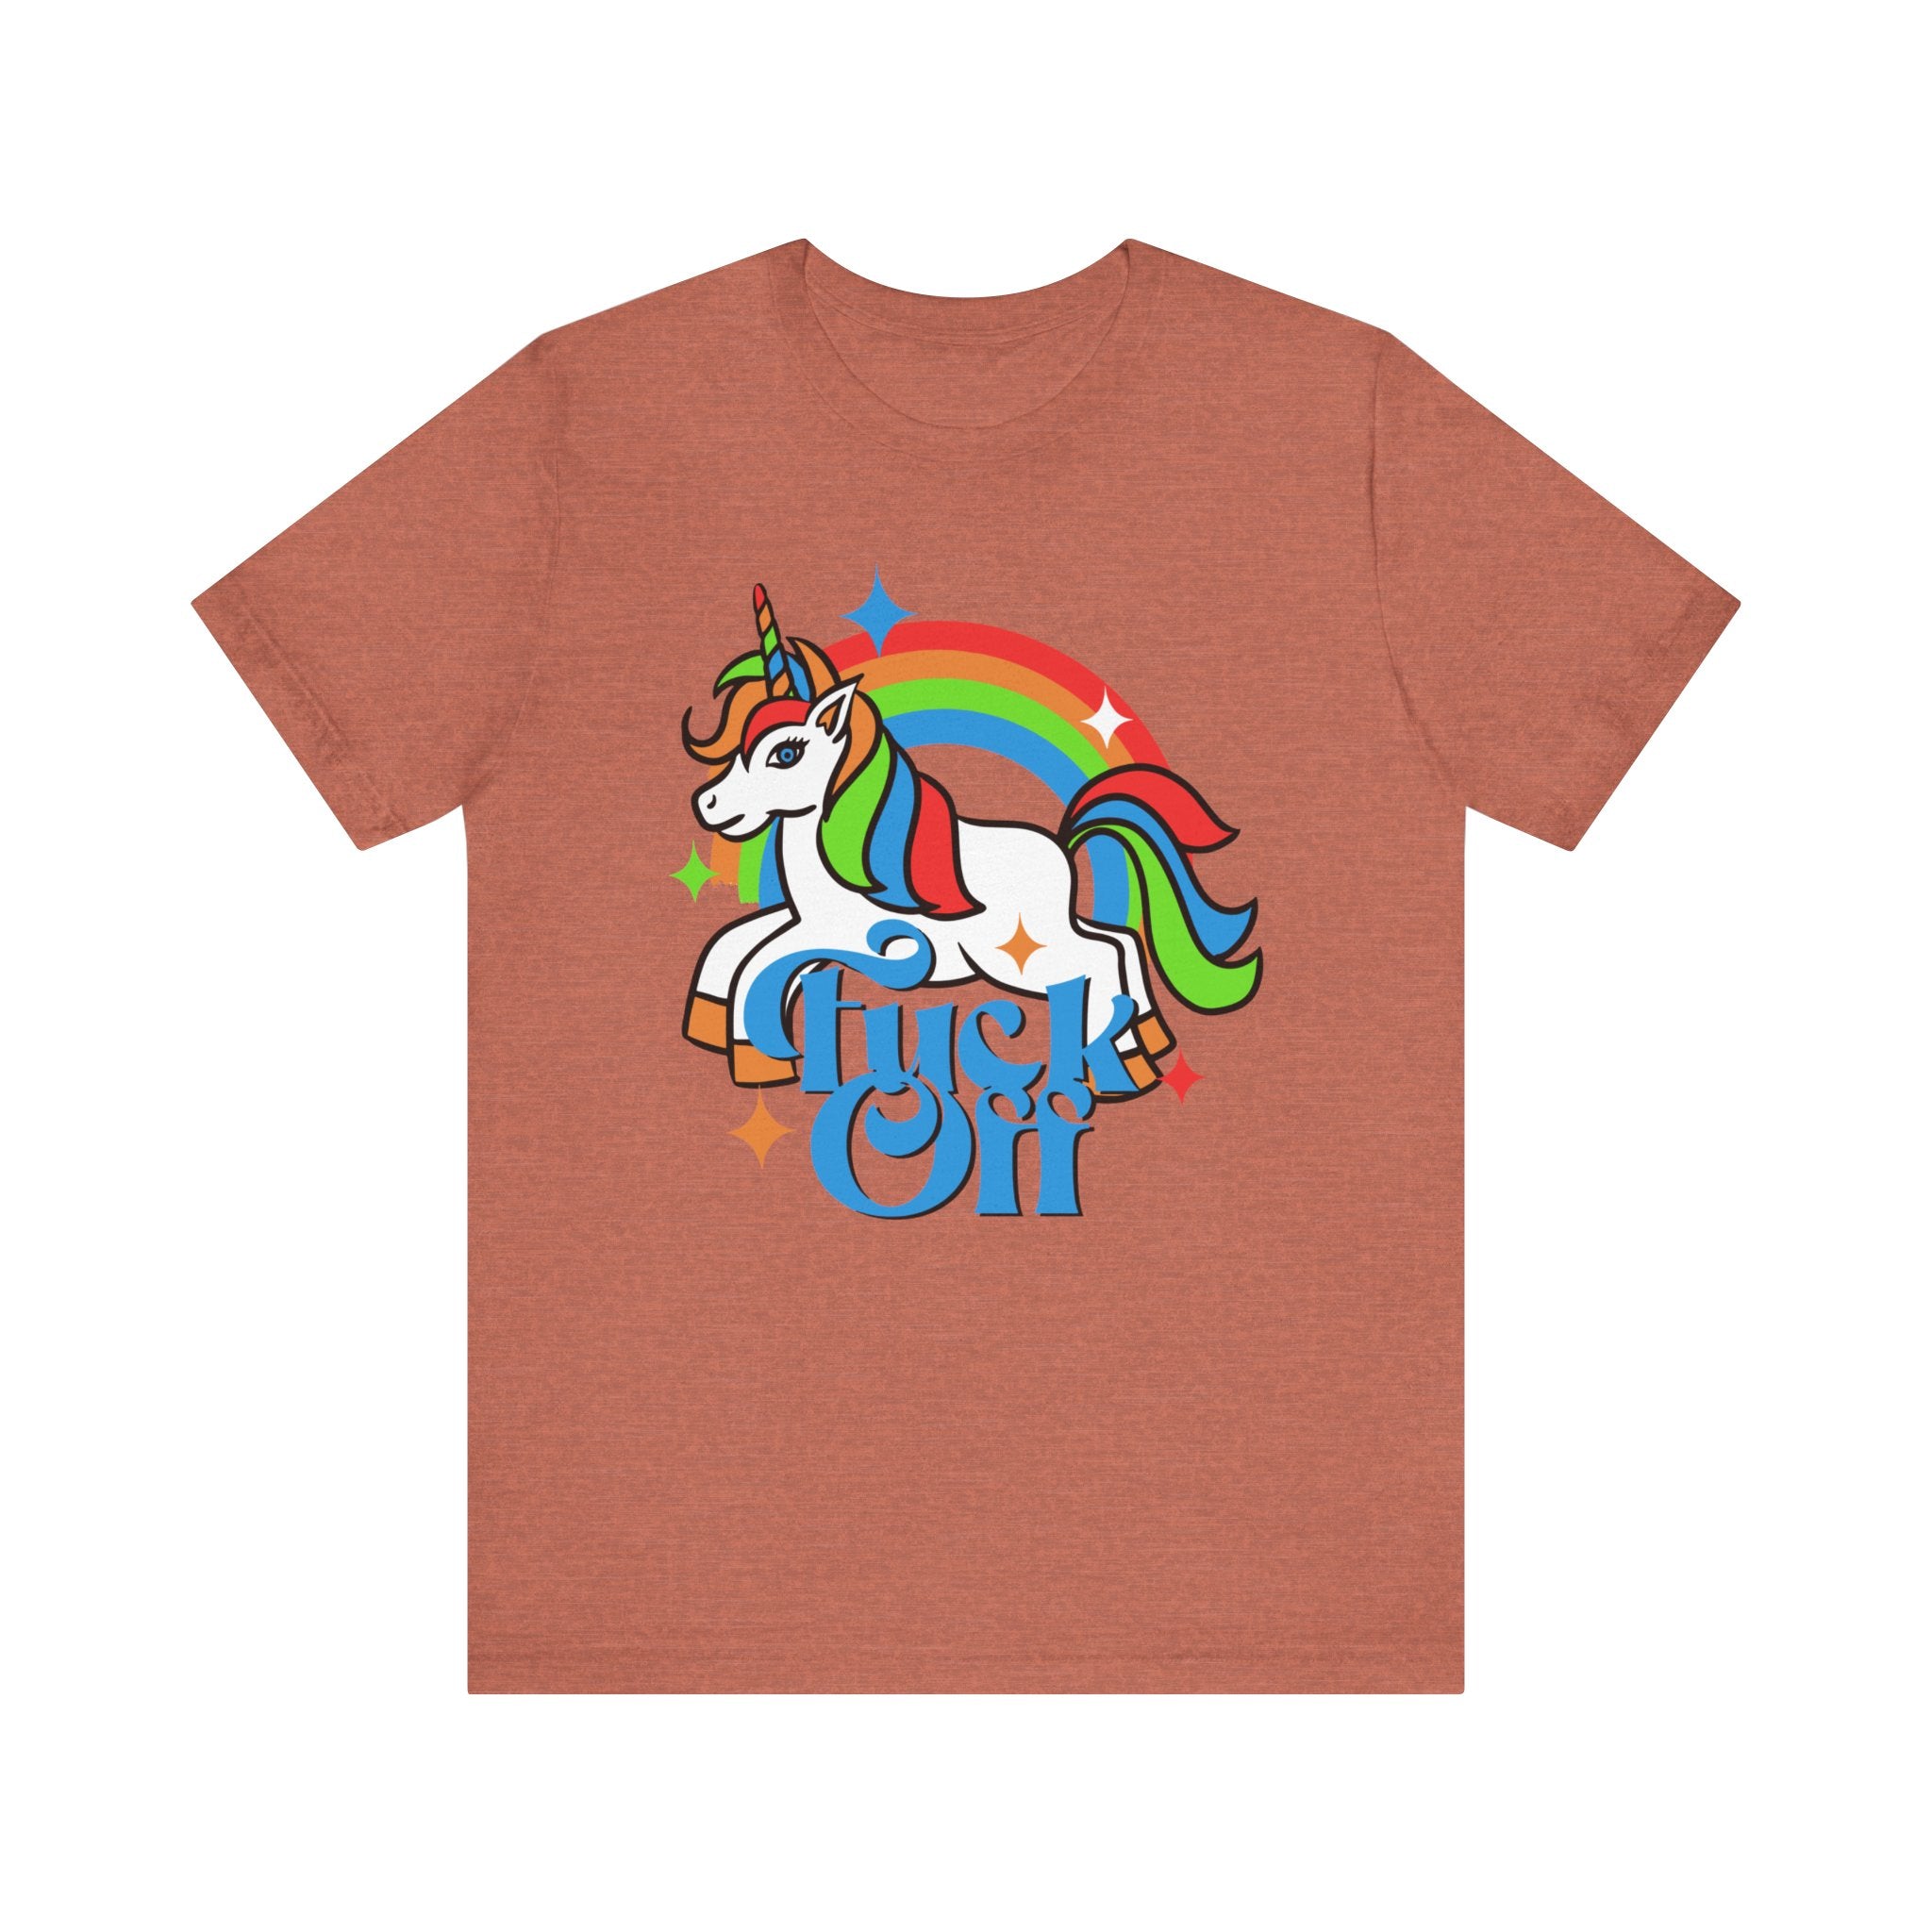 A F off T-shirt featuring a colorful unicorn graphic with a rainbow mane and tail, positioned above the stylized words "high on" in blue tones. This high-quality print adorns a unisex jersey t